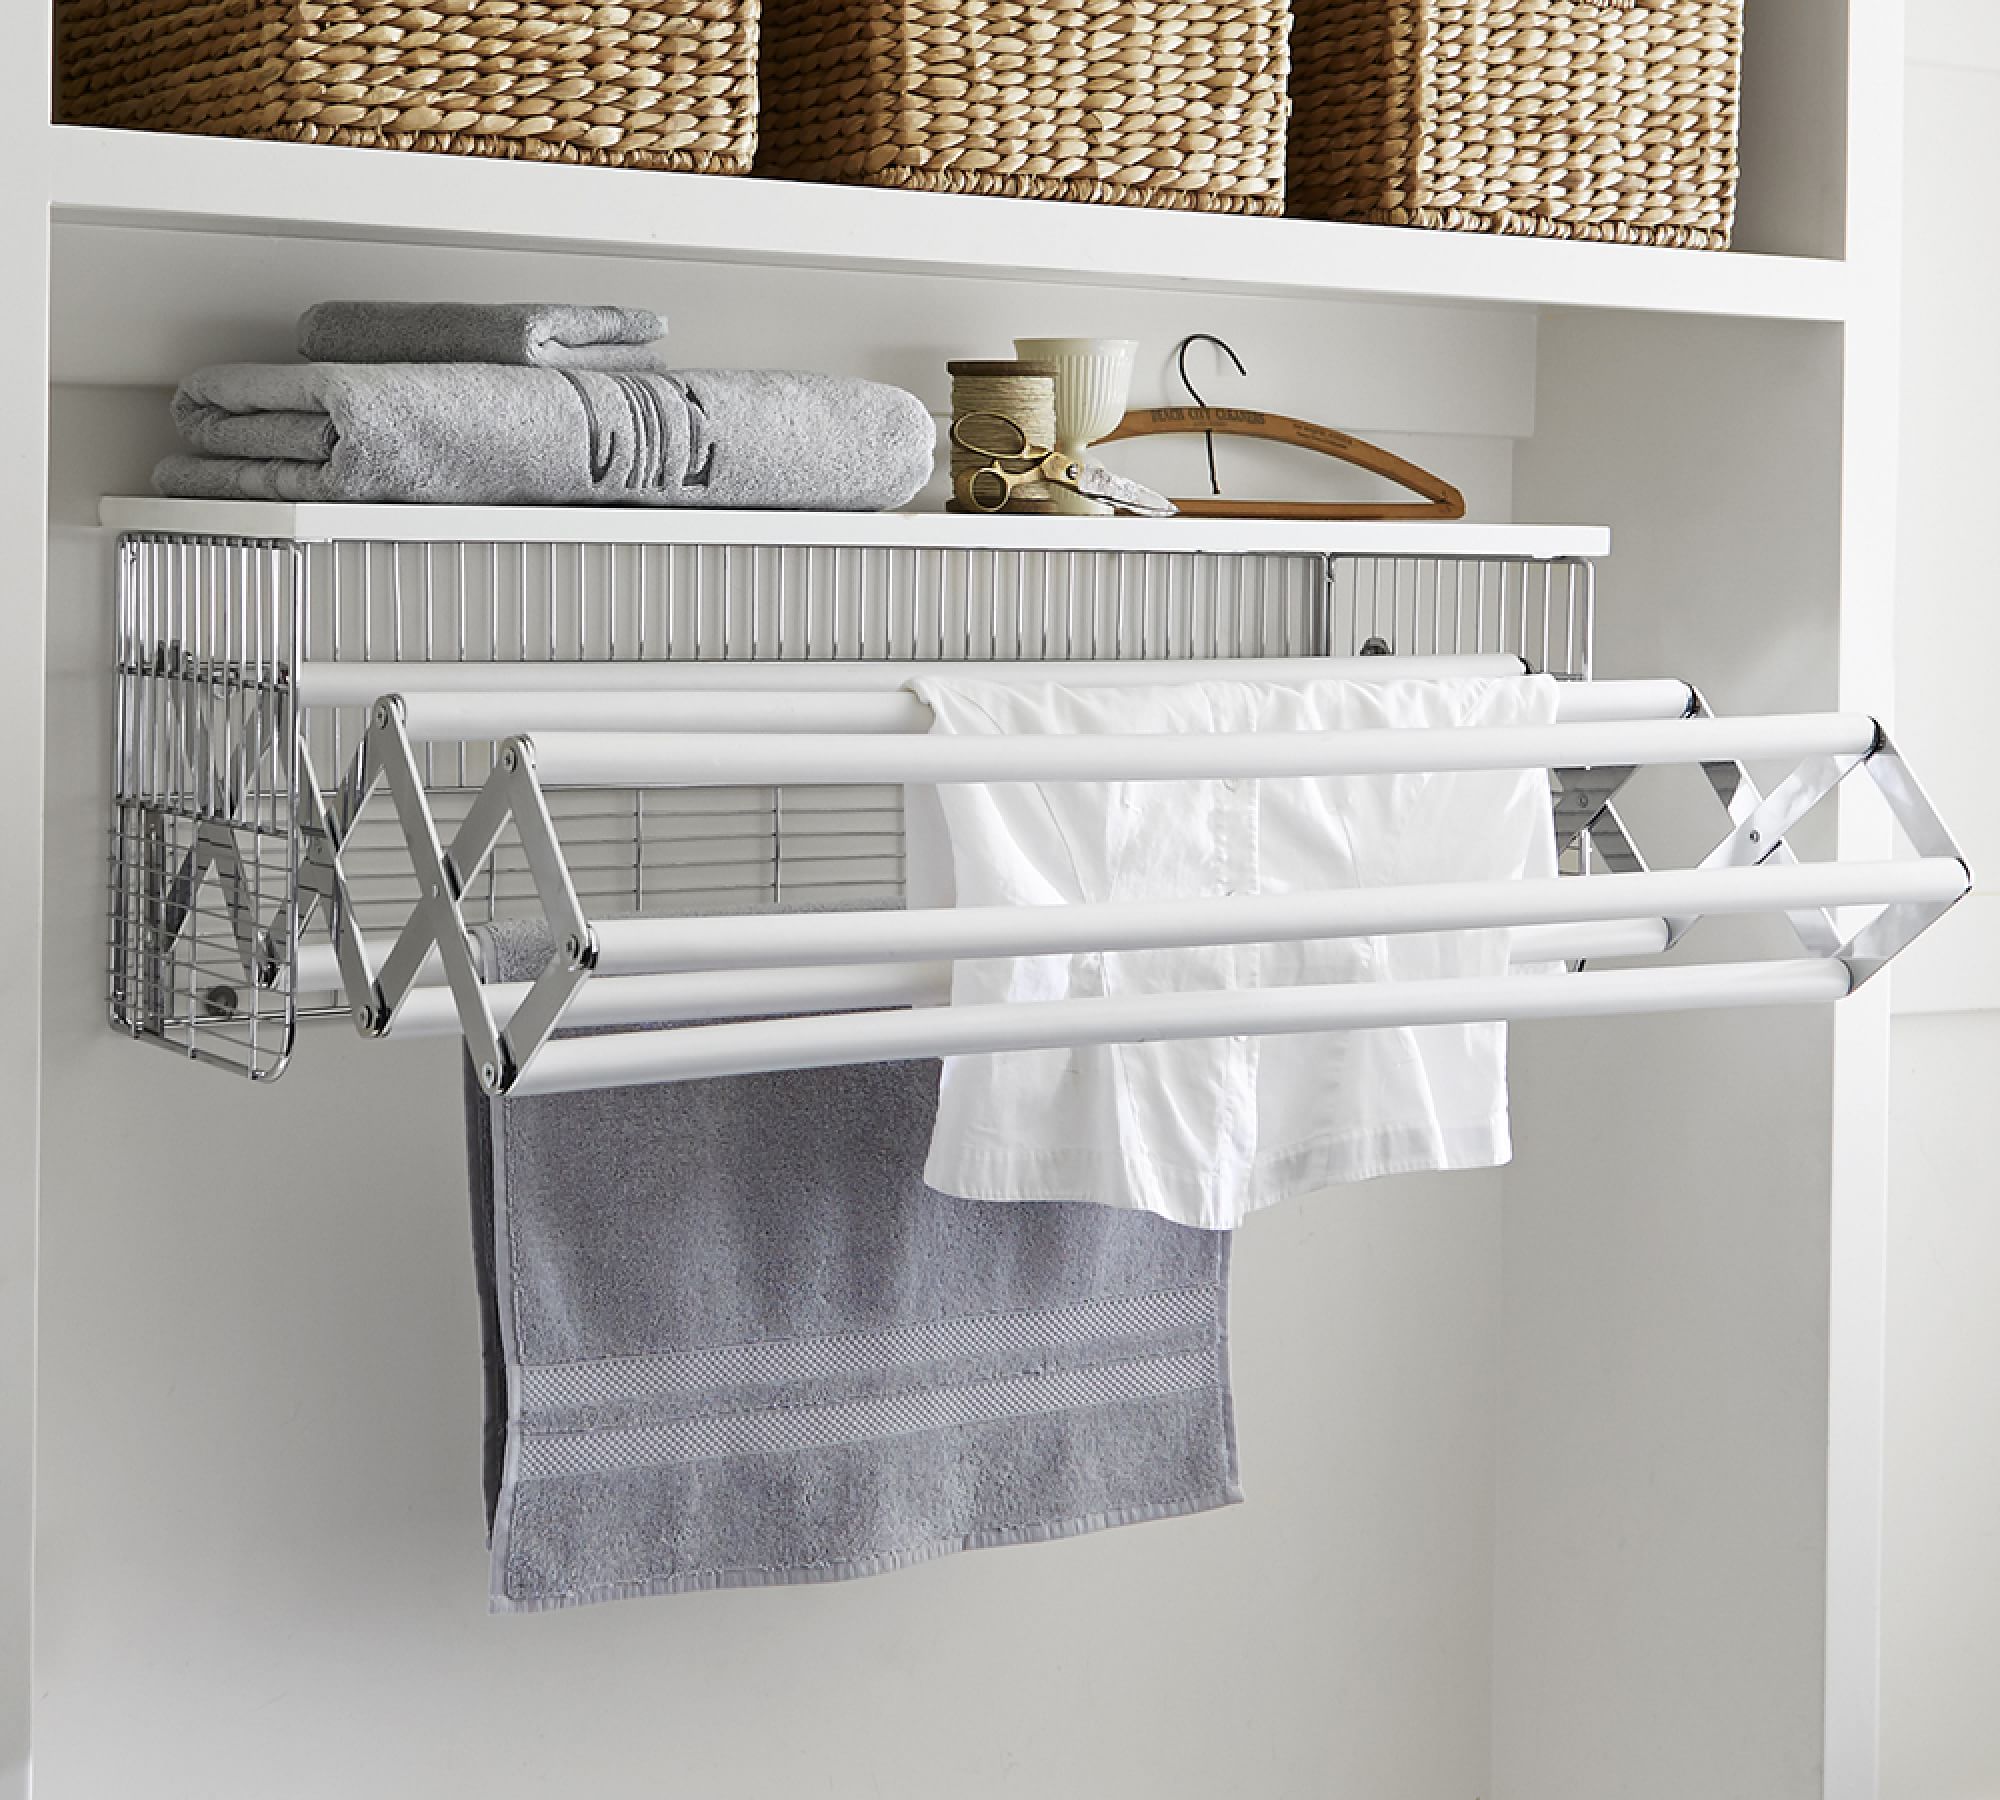 Portable Drying Rack for Laundry, Powerful Suction Wall Mounted